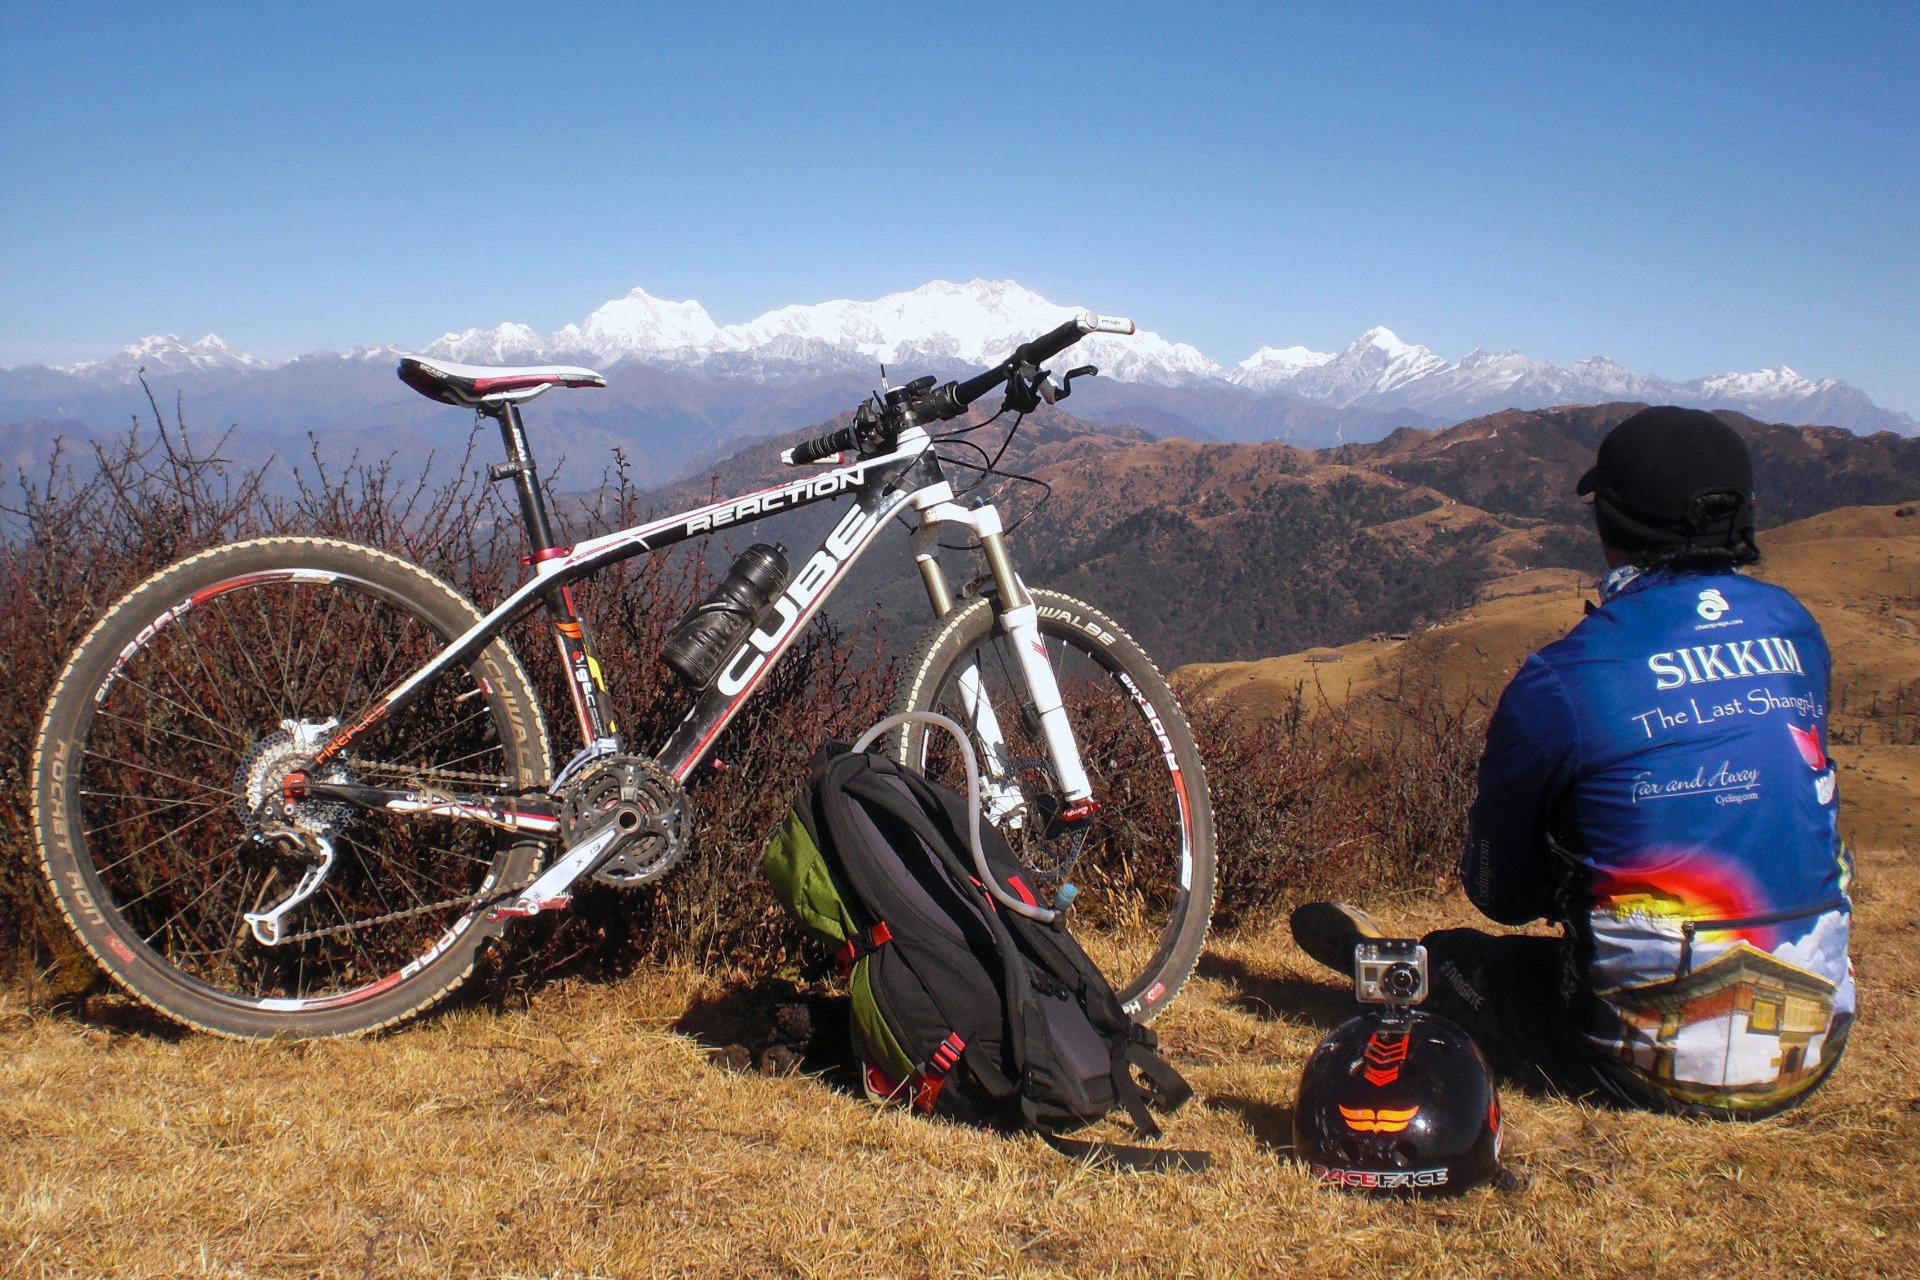 CYCLE TOUR OF SIKKIM & WEST BENGAL